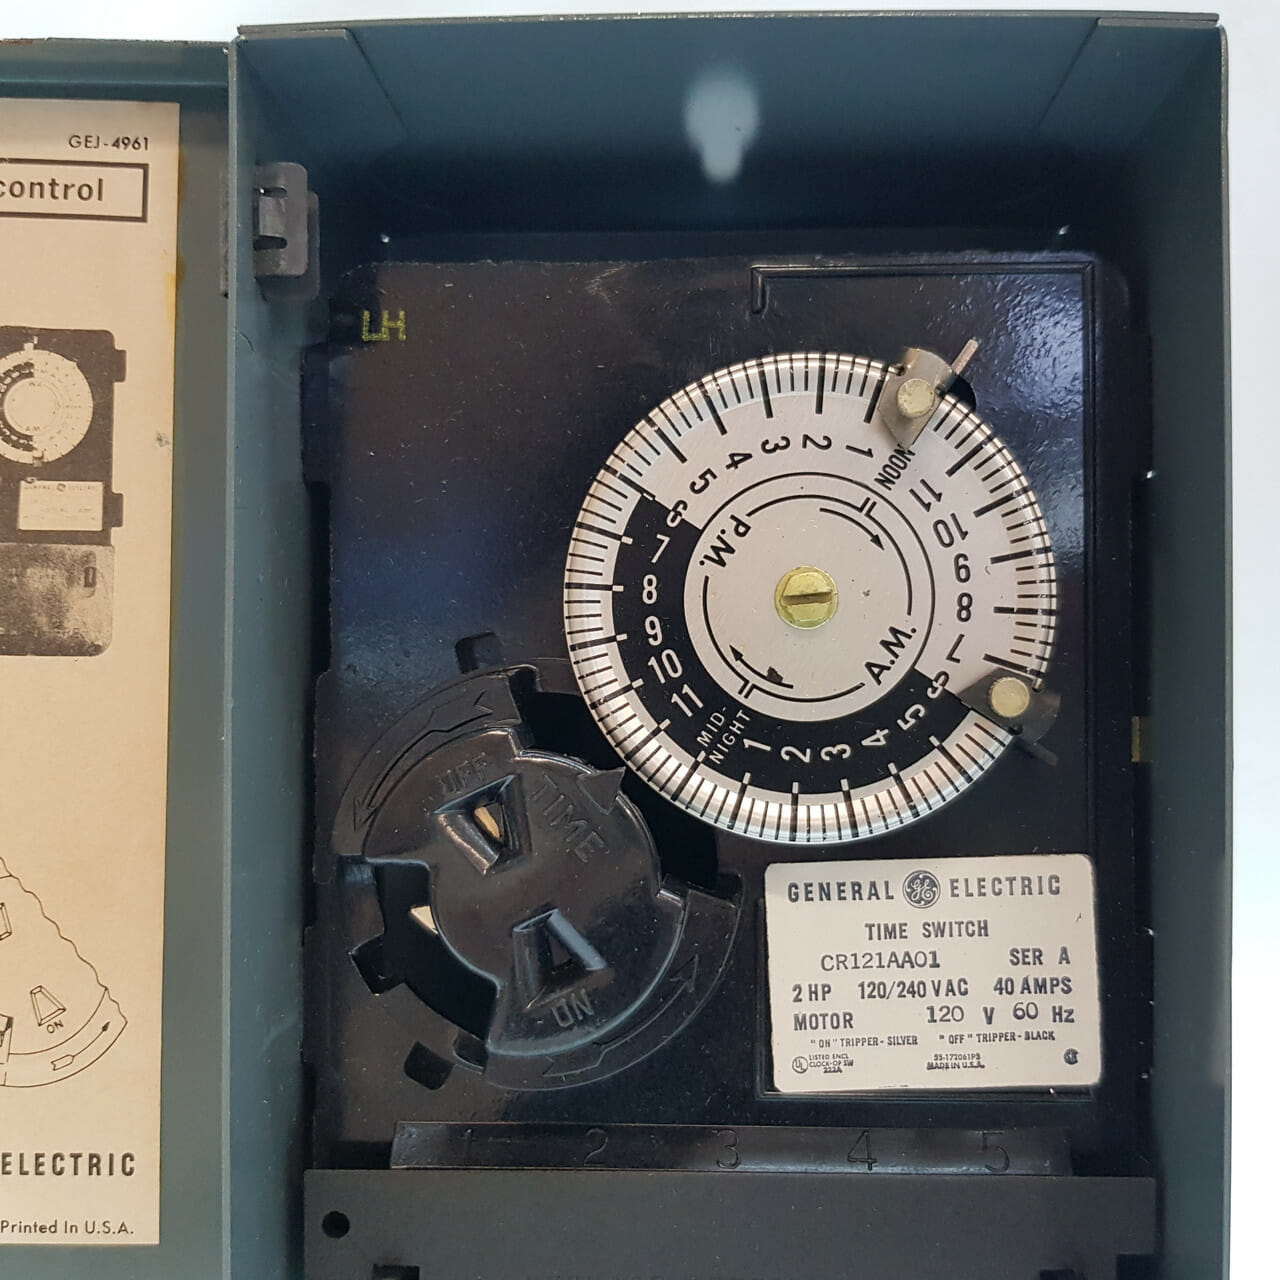 GE GENERAL ELECTRIC TIME SWITCH CR121AA01 #53319